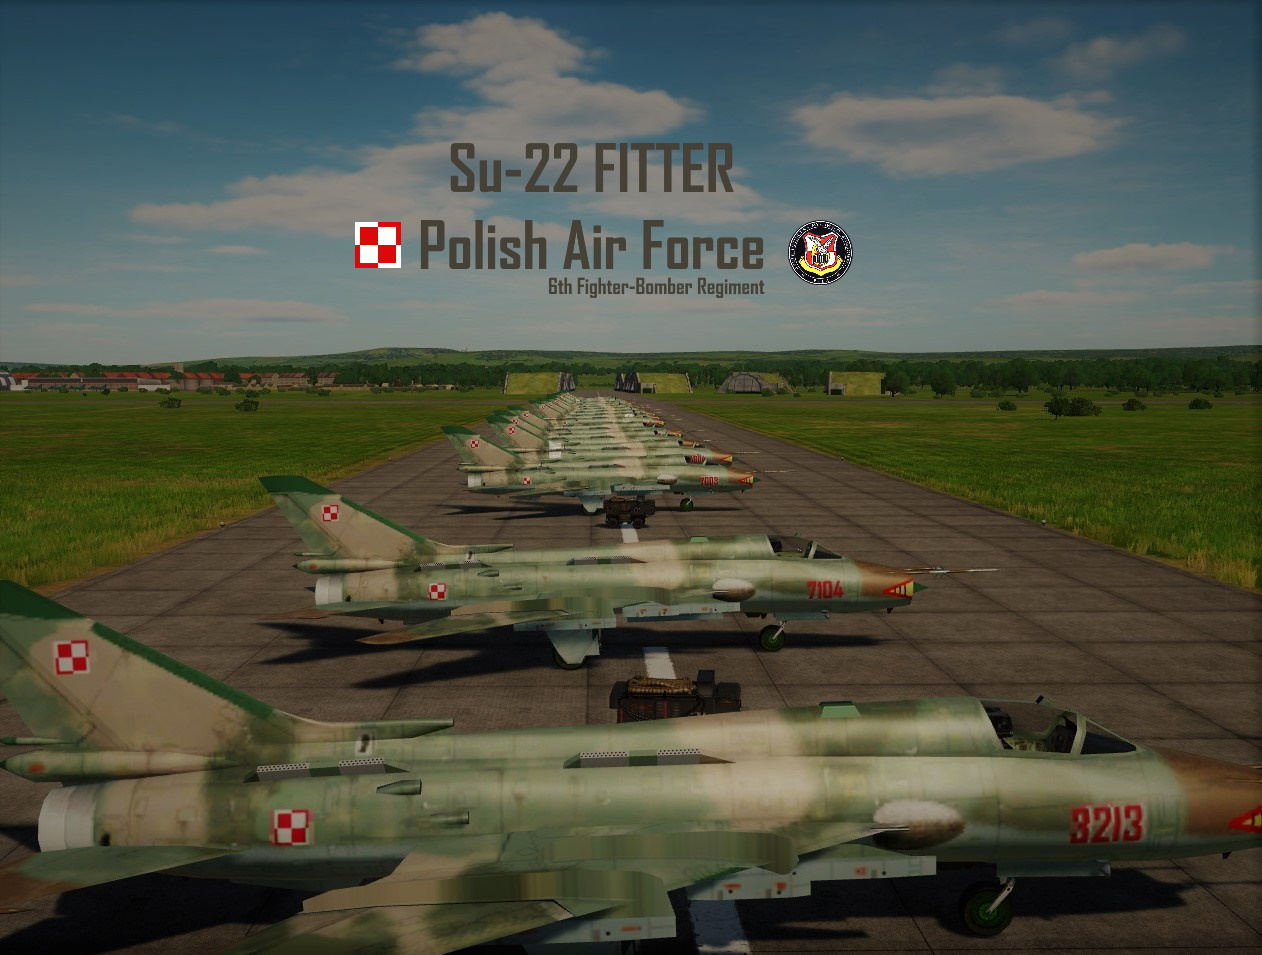 Su-22 Fitter - Polish Air Force 6th Fighter-Bomber Regiment PIŁA 1.1